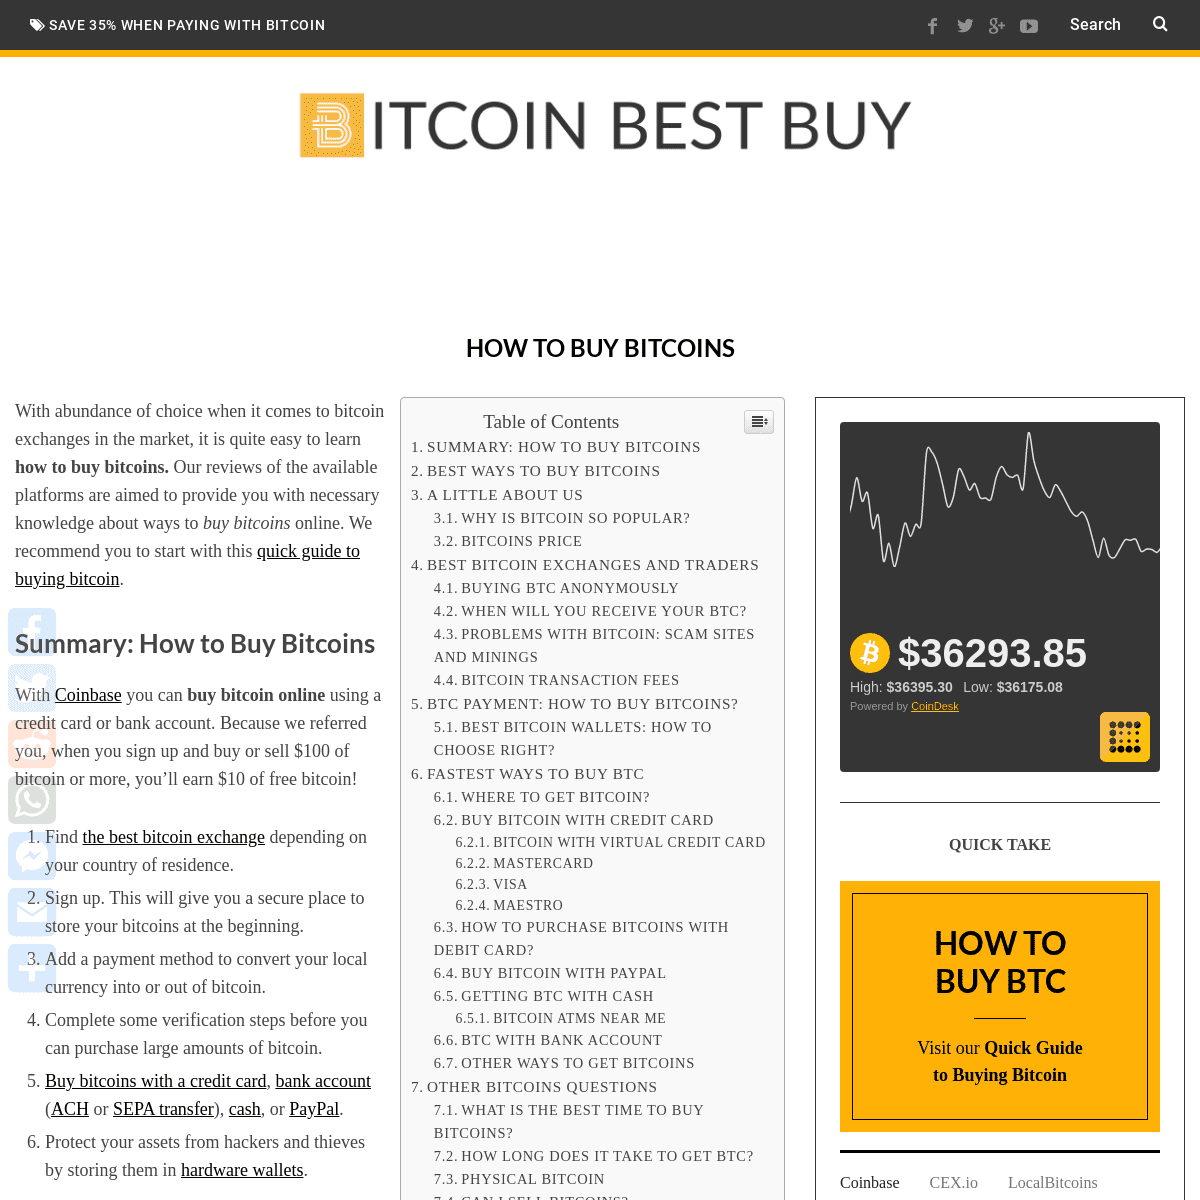 A complete backup of https://bitcoinbestbuy.com